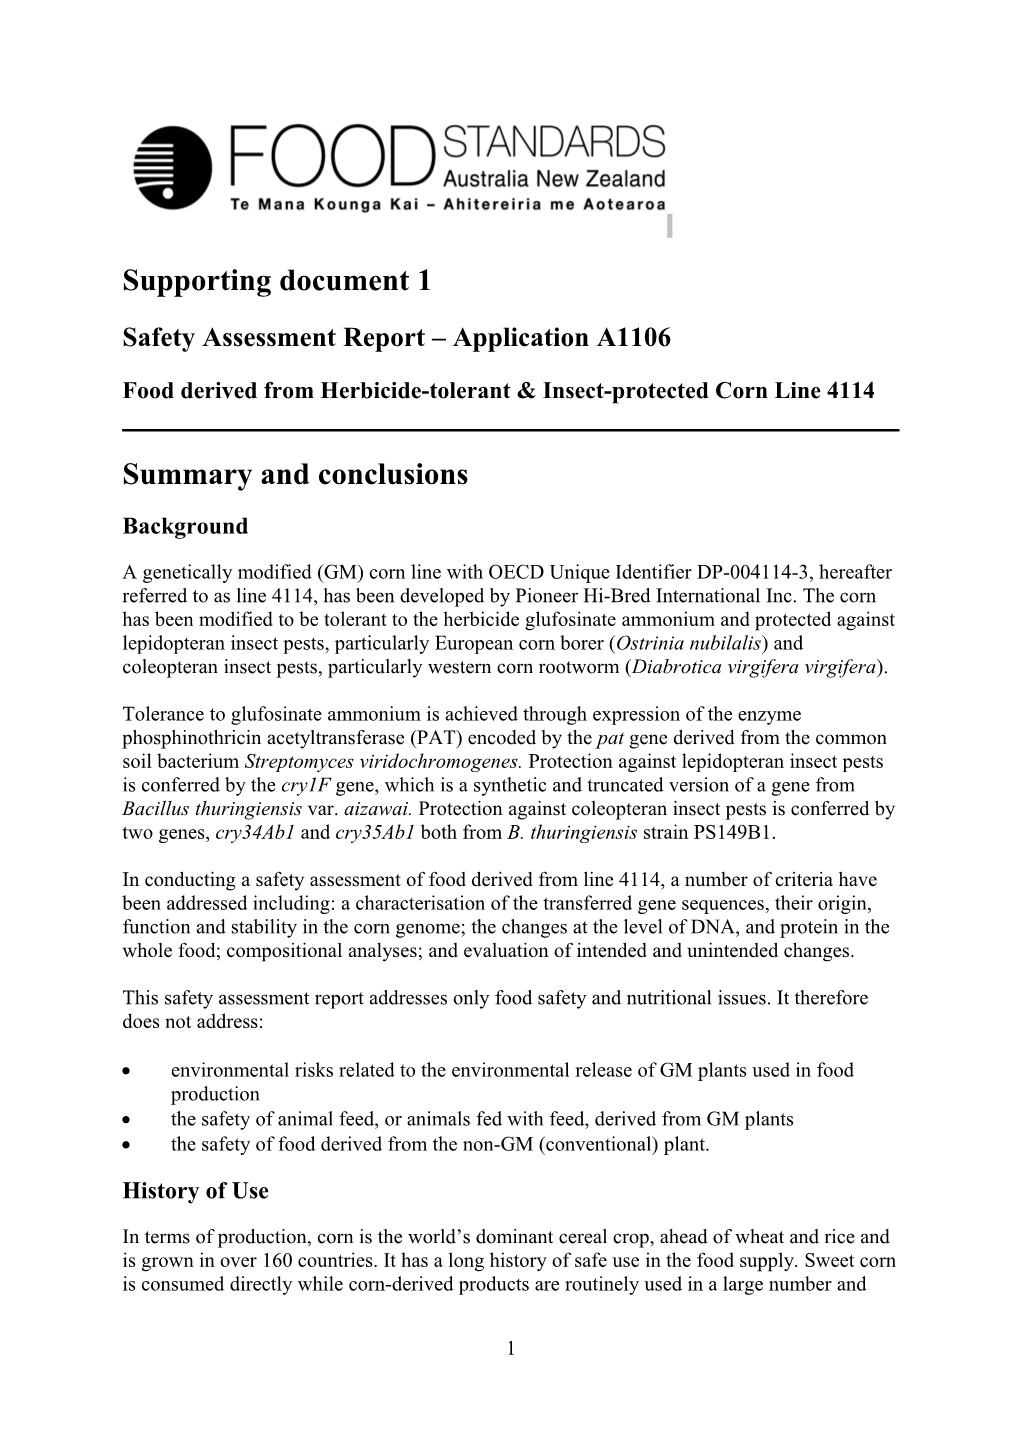 Safety Assessment Report Application A1106